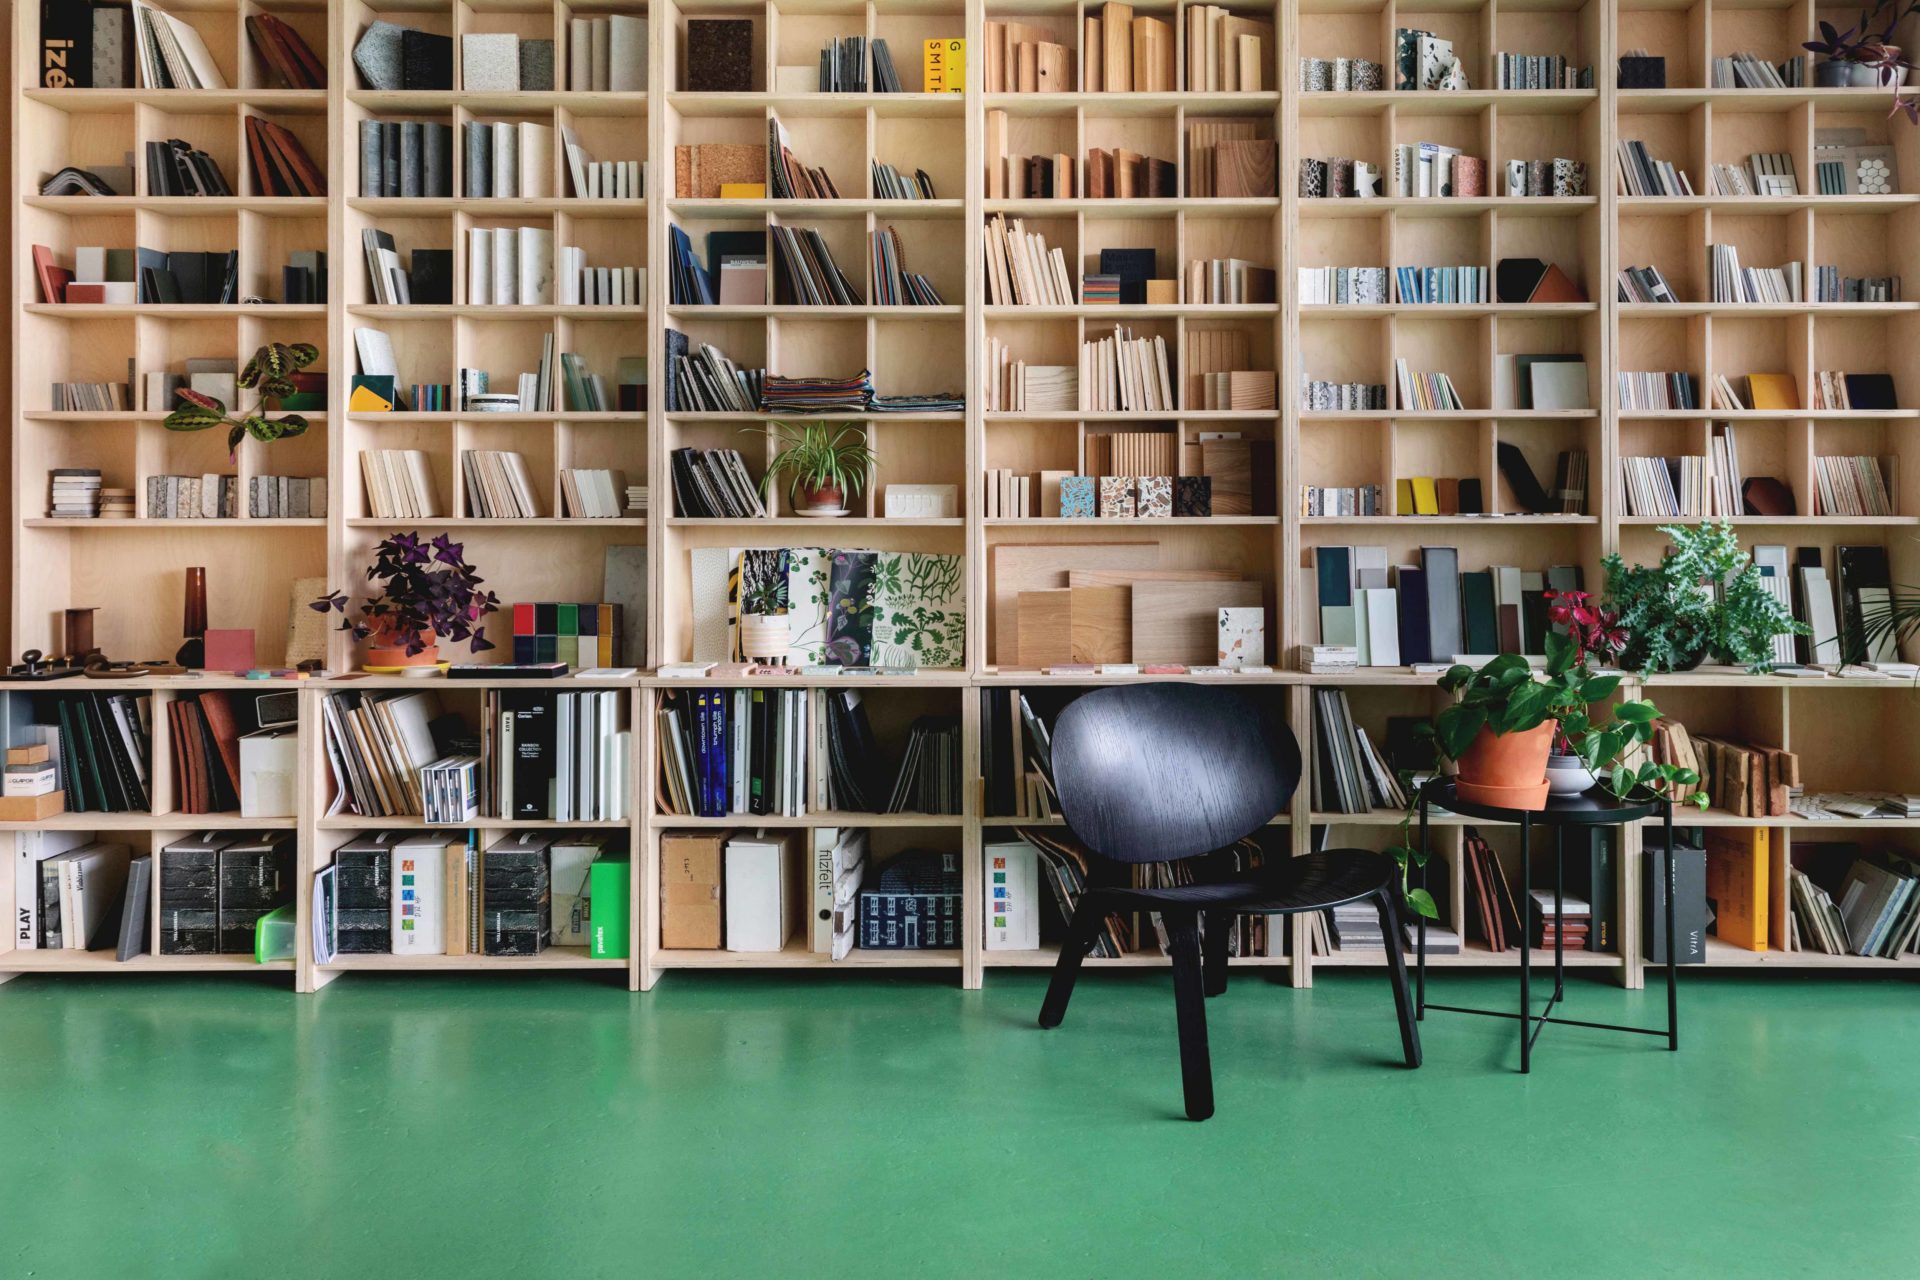 Emil Eve Architects turn their shared studio into an inspiring workspace